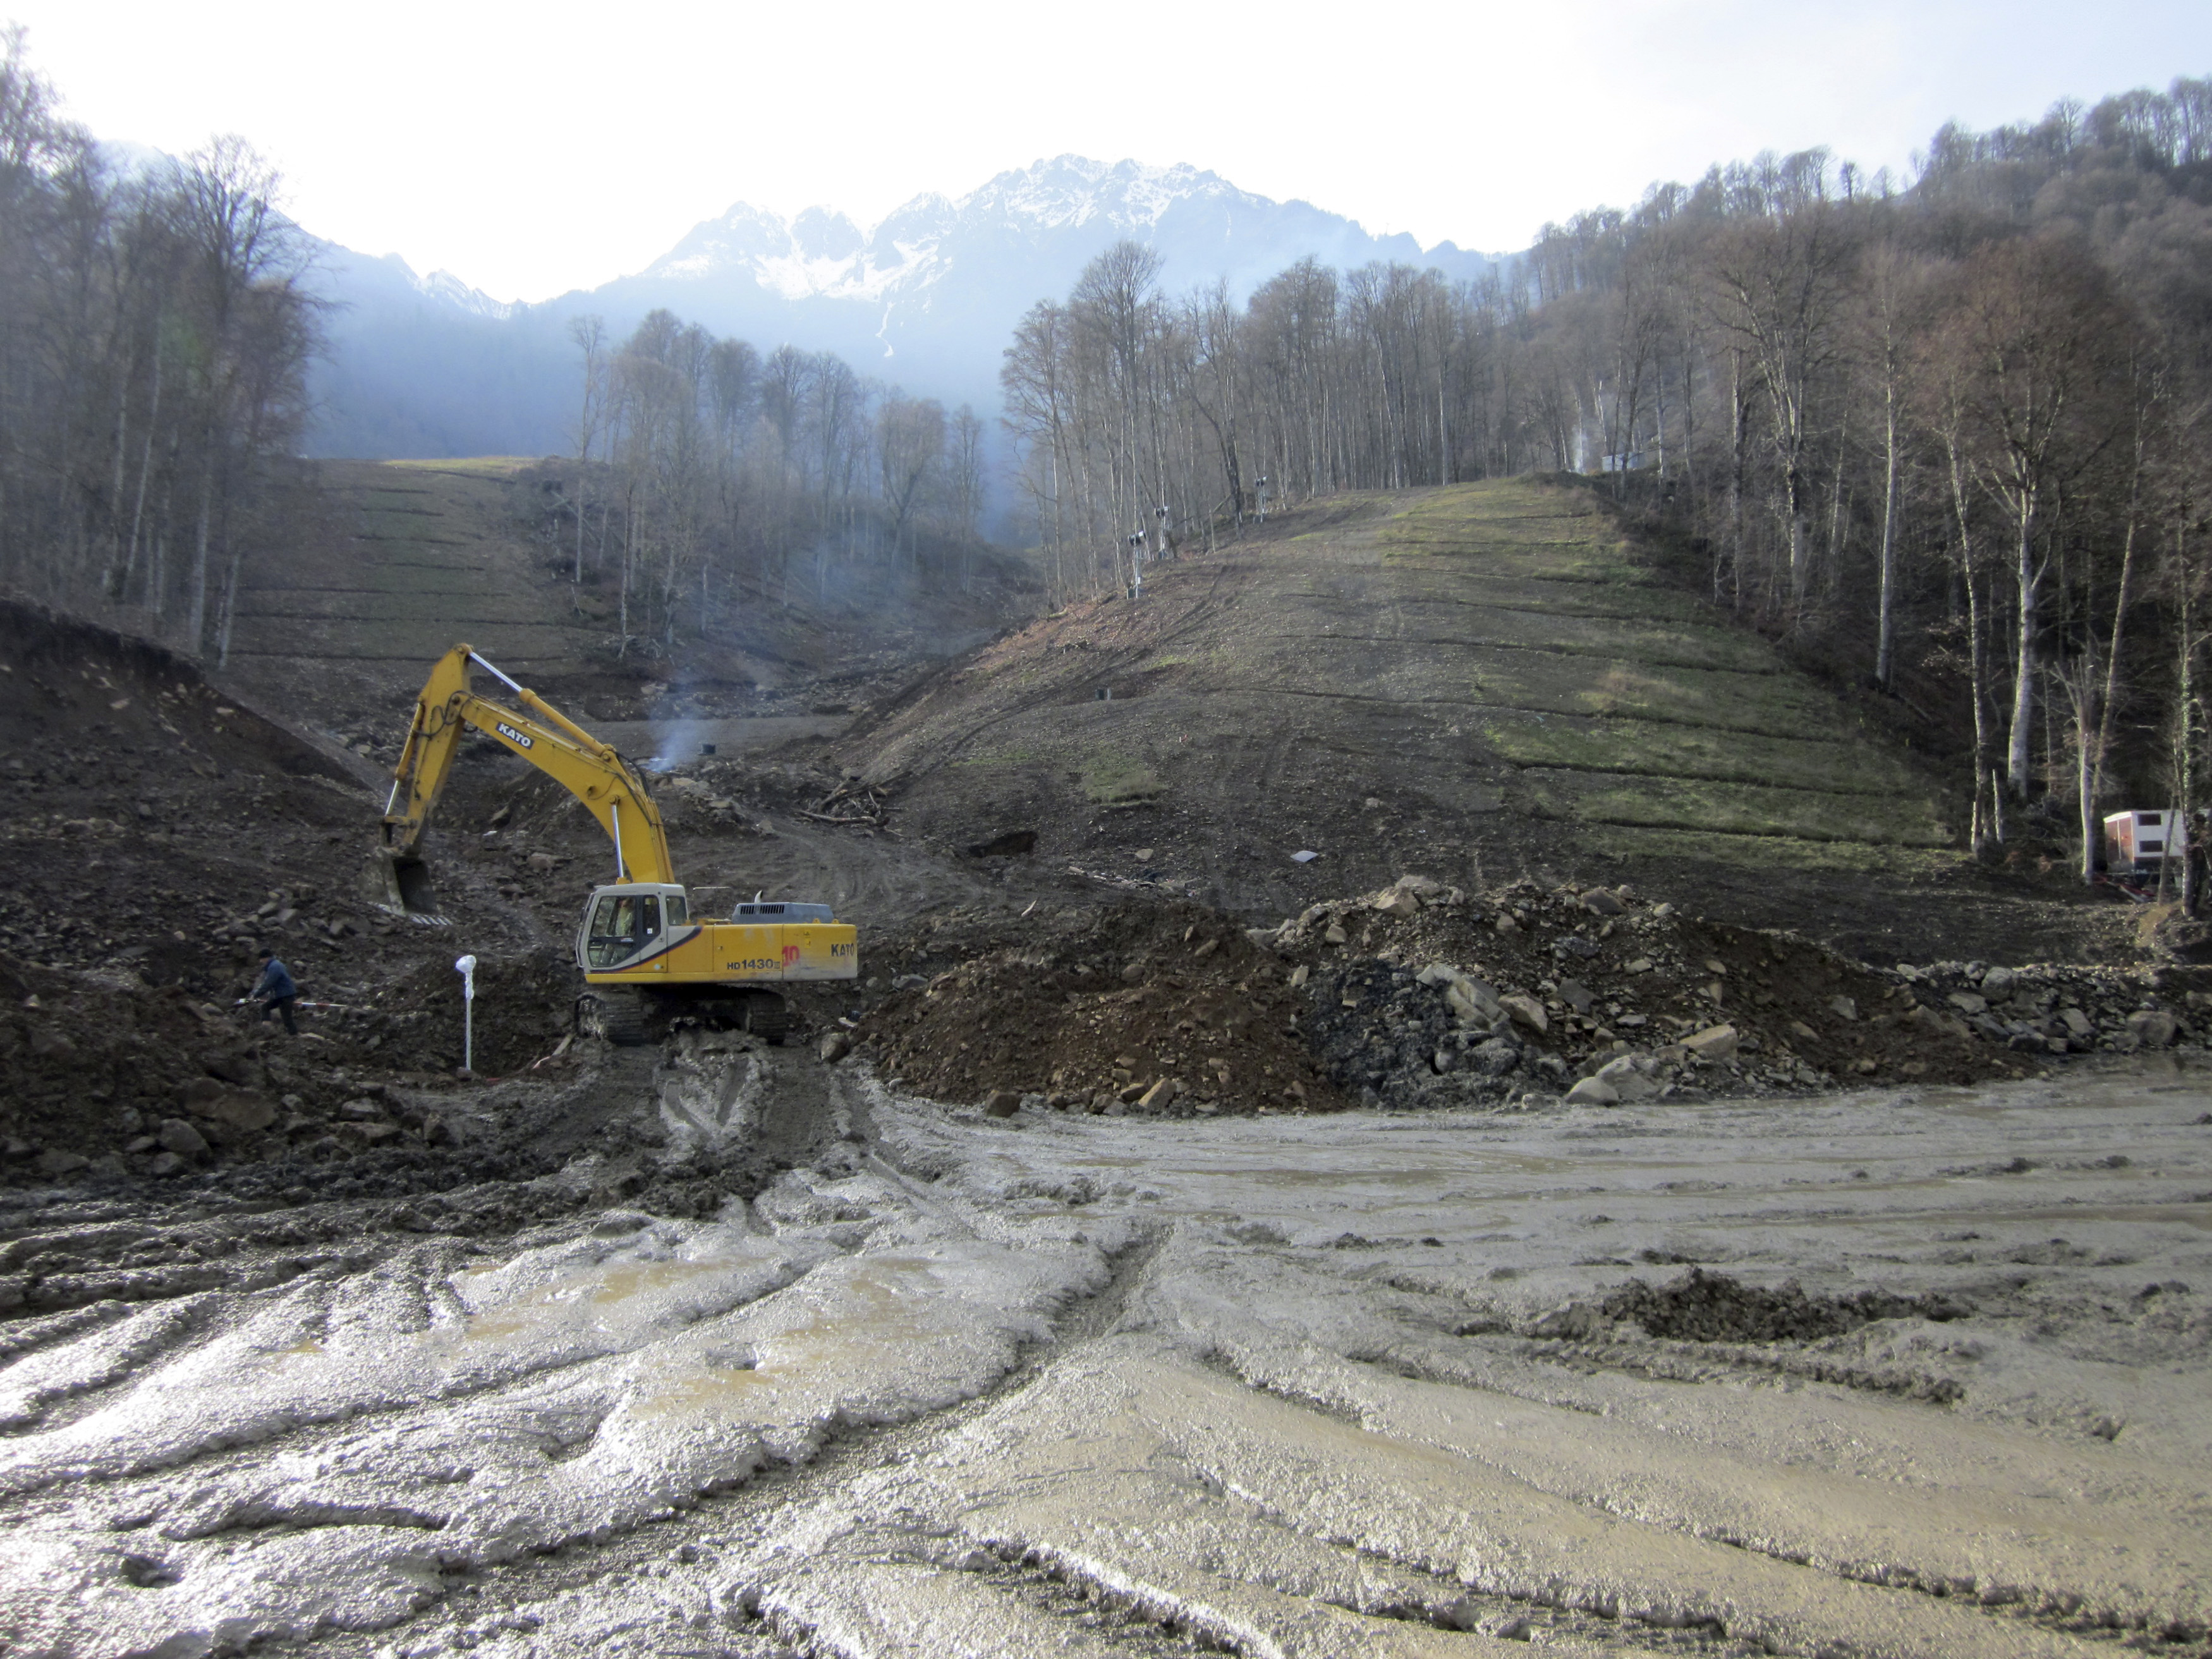 Construction for the Olympic Games has led to the destruction of forests in Sochi.